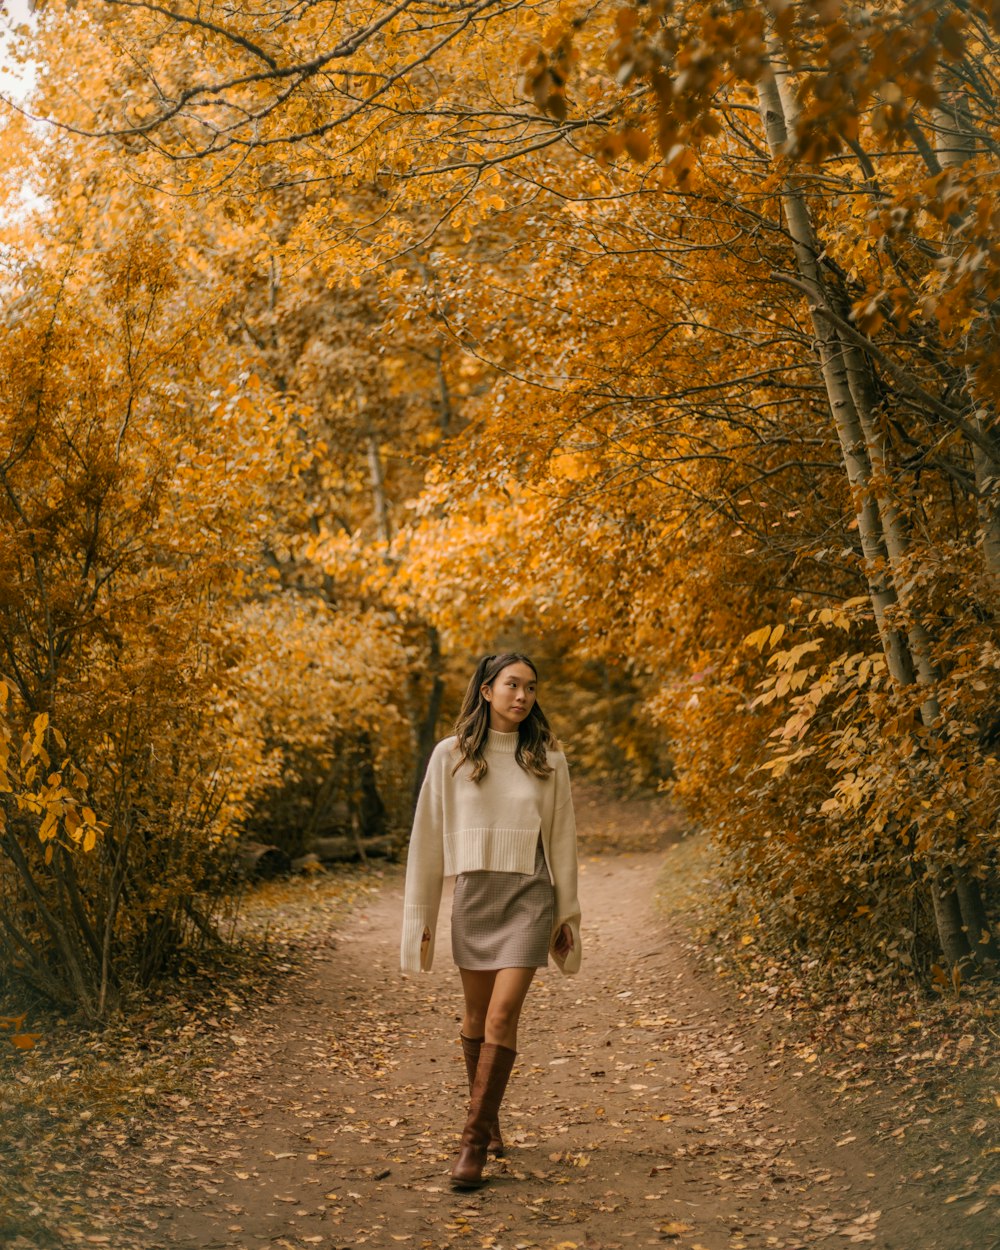 a woman walking down a dirt road surrounded by trees